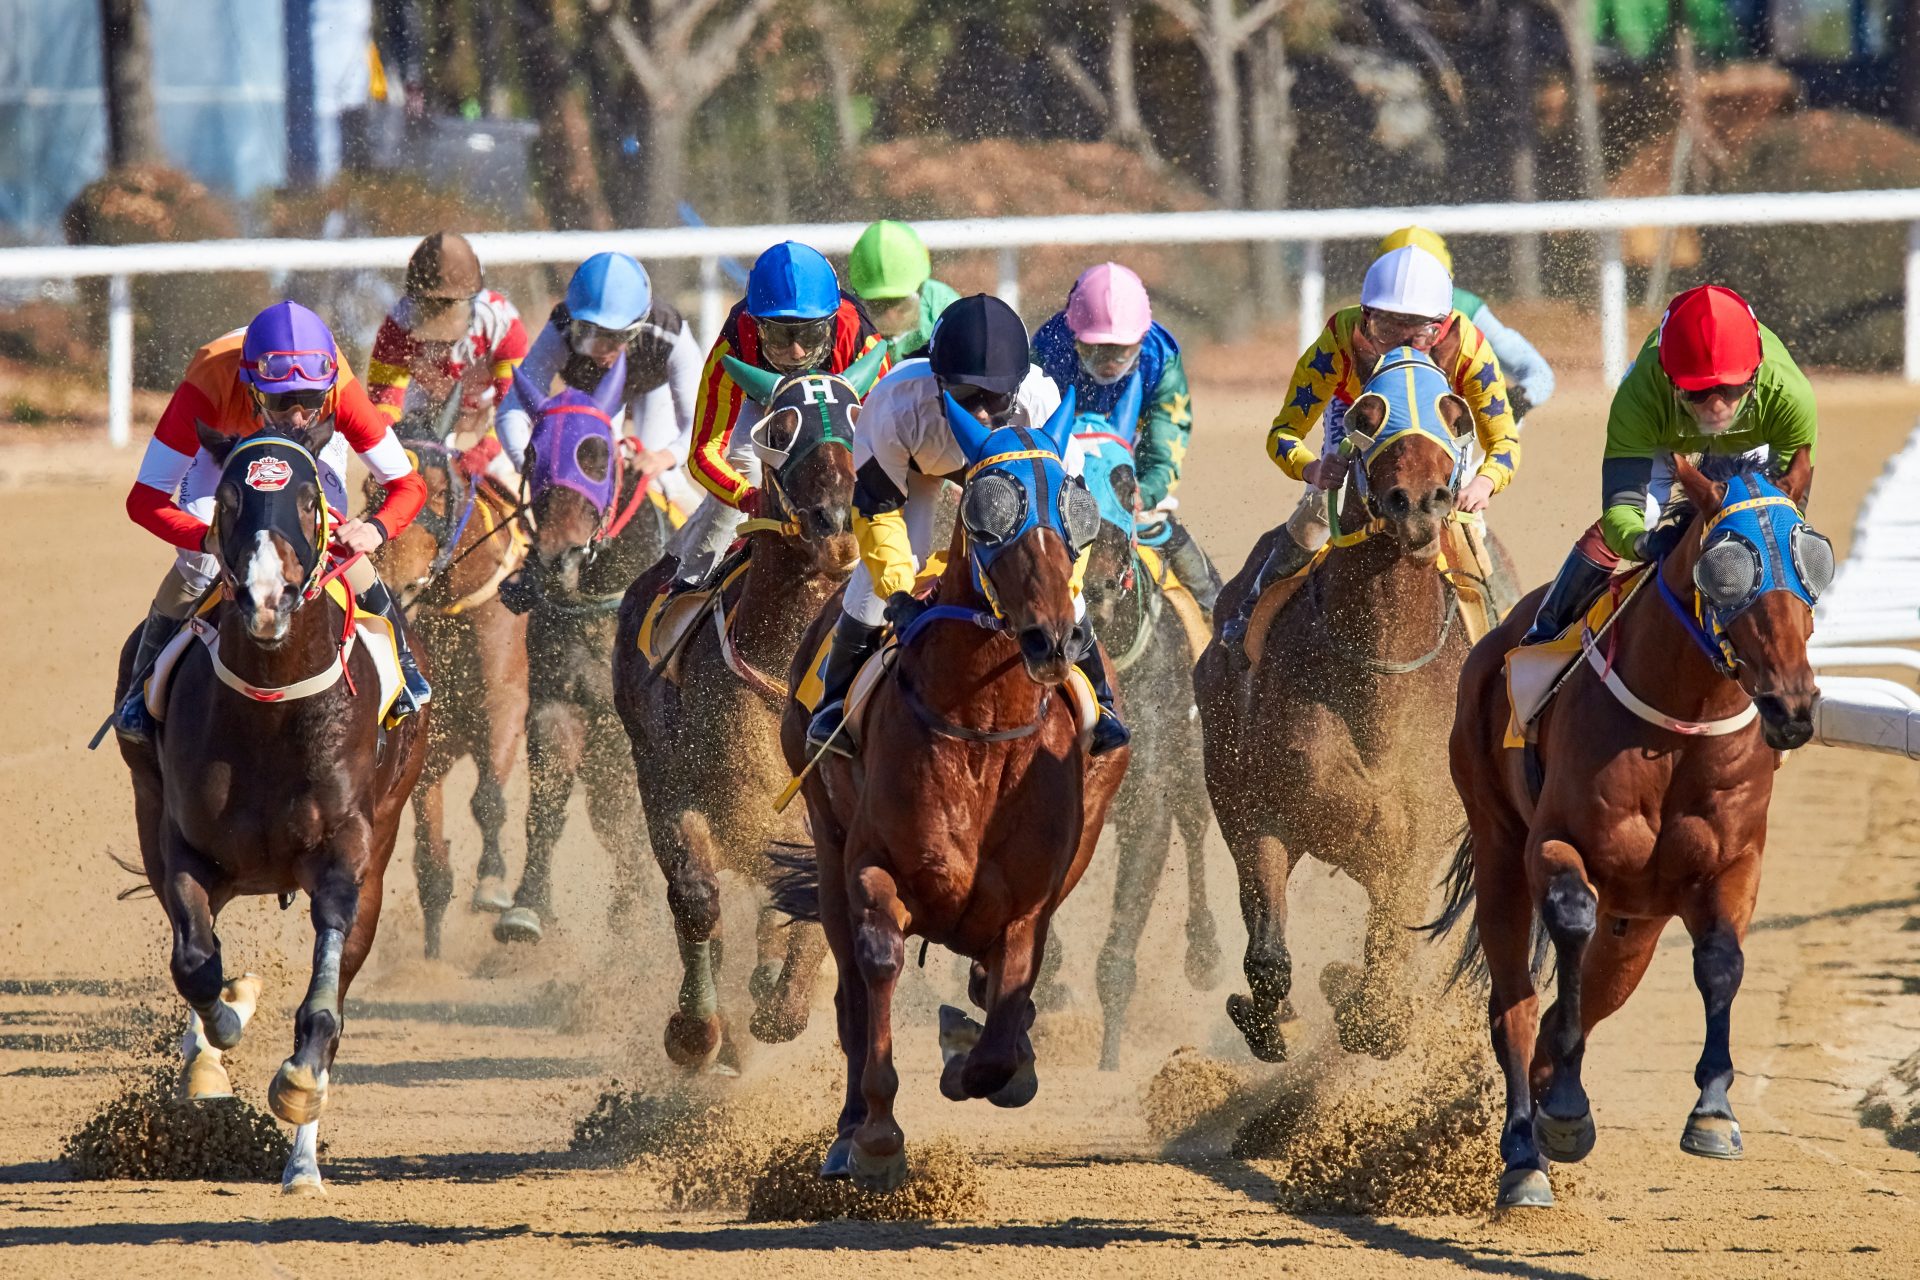 Horses racing on a dirt track